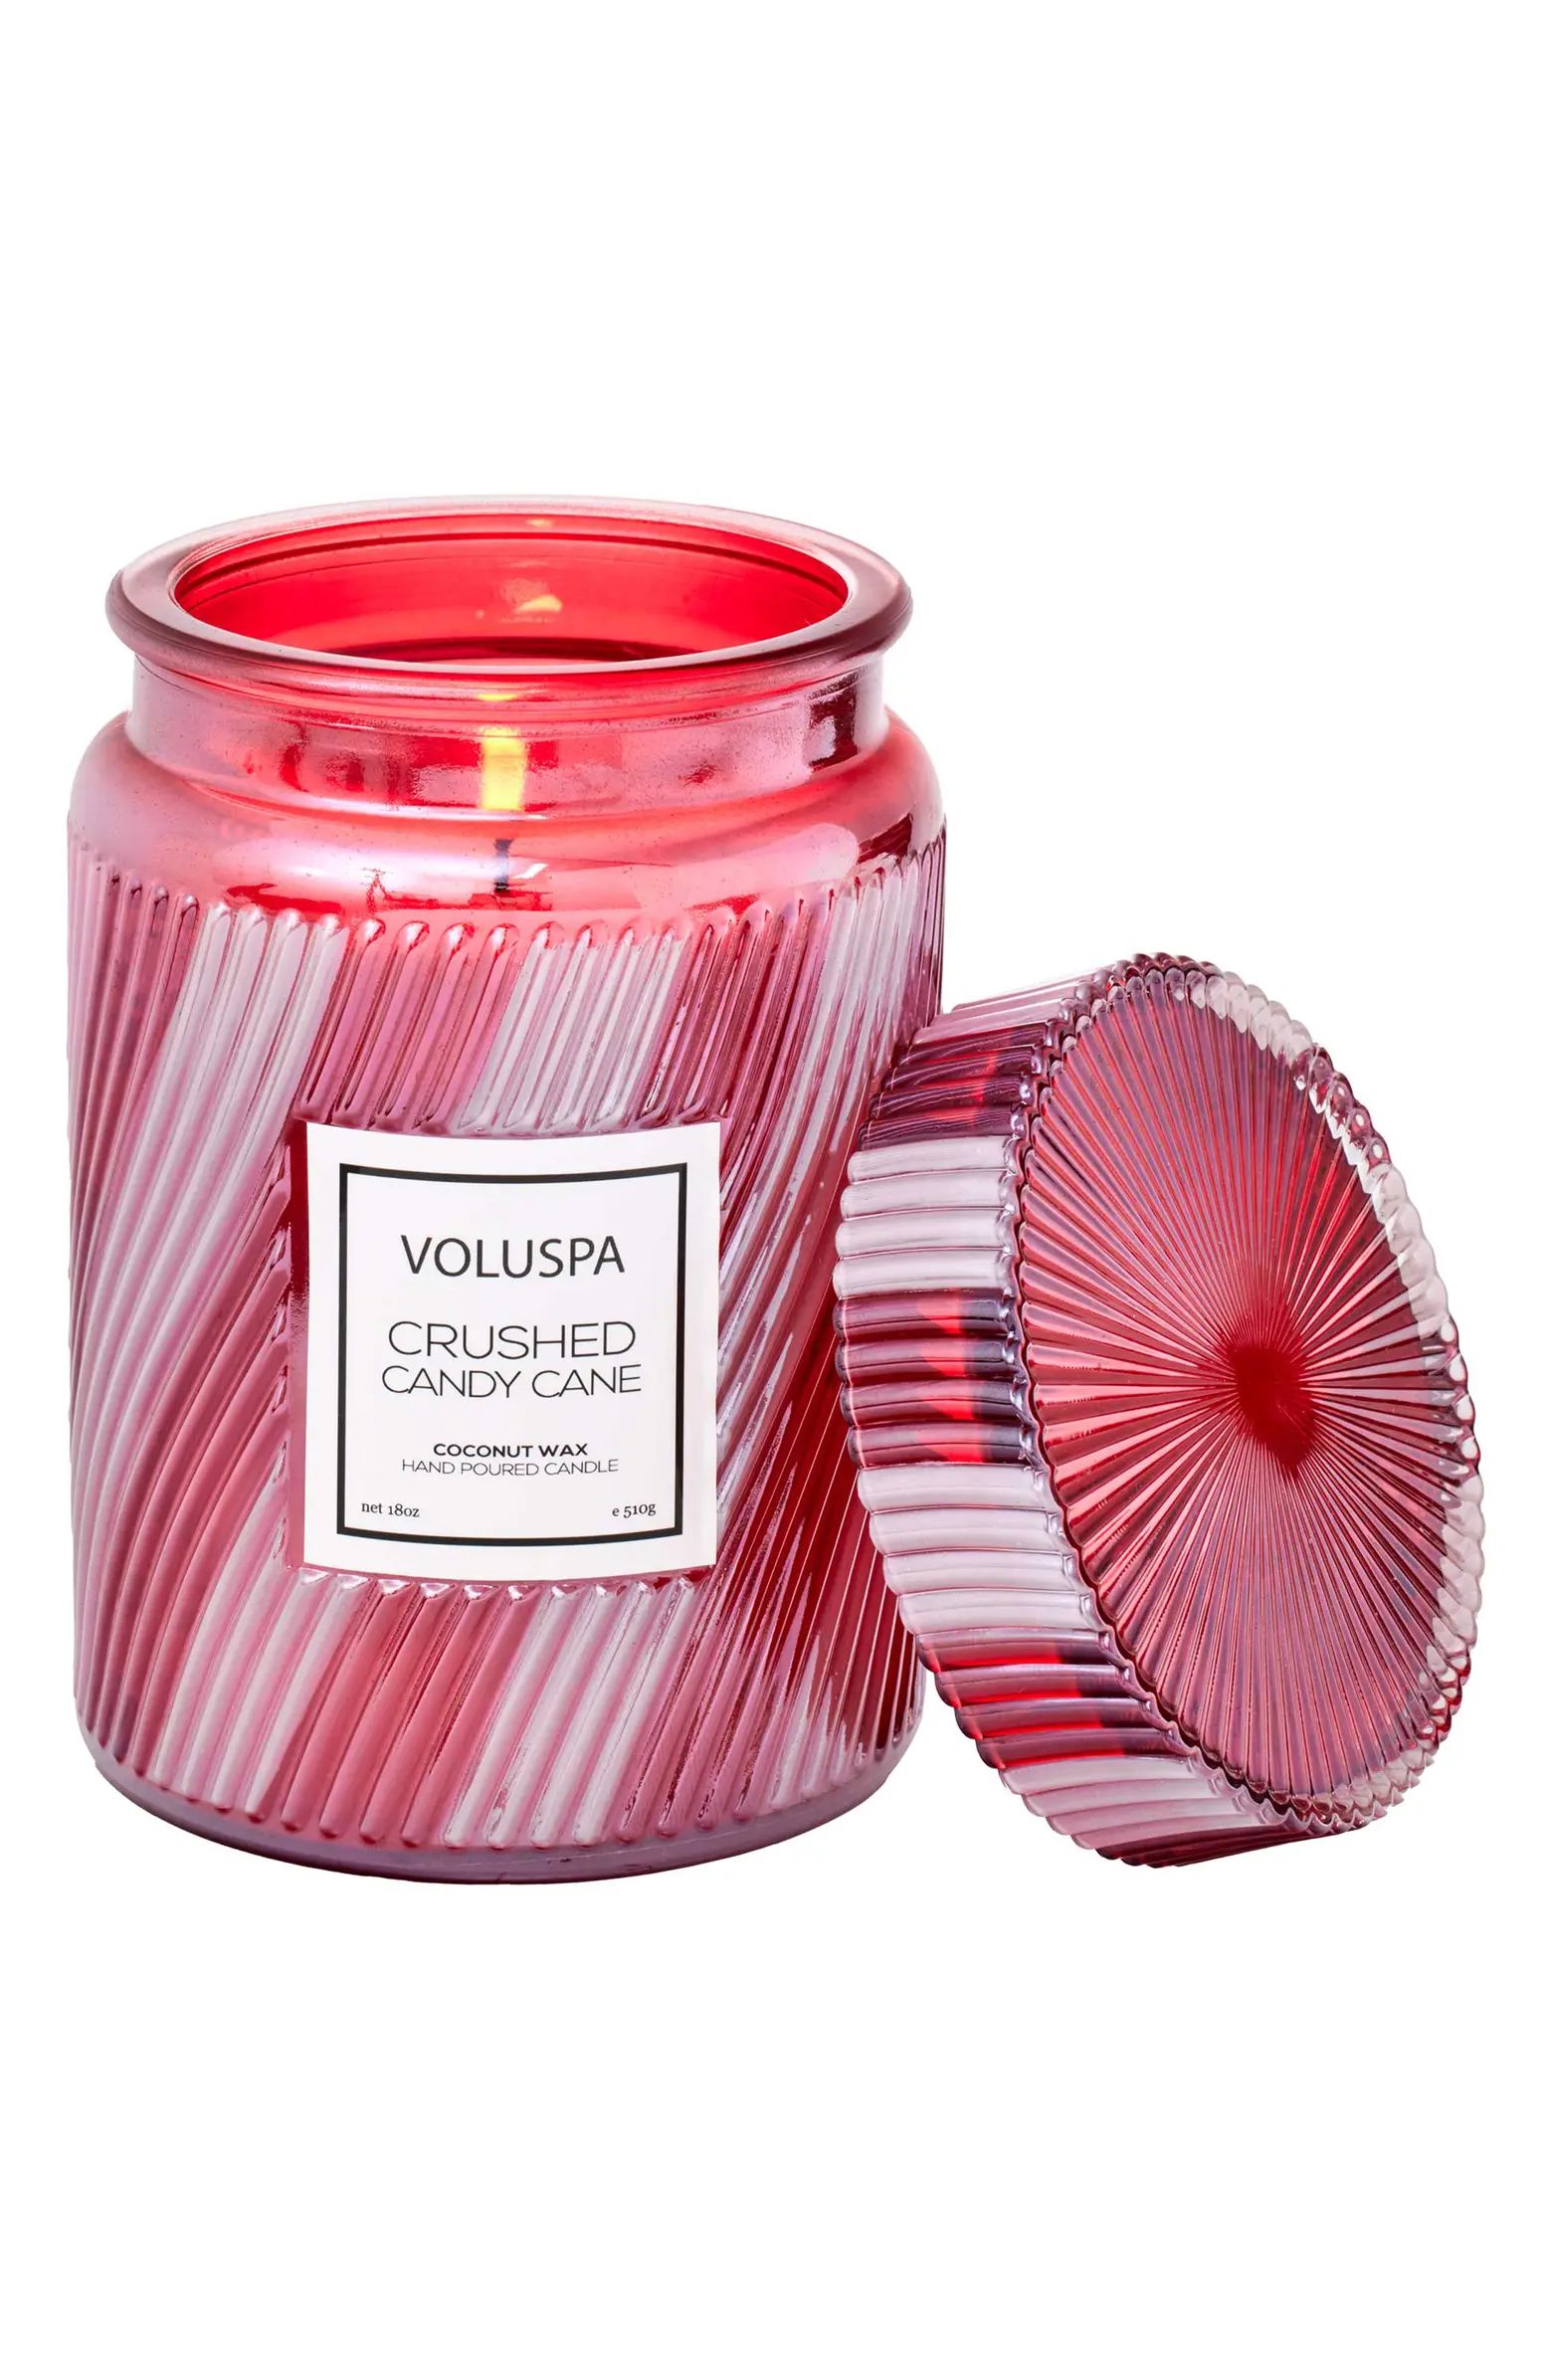 Crushed Candy Cane Candle | Nordstrom